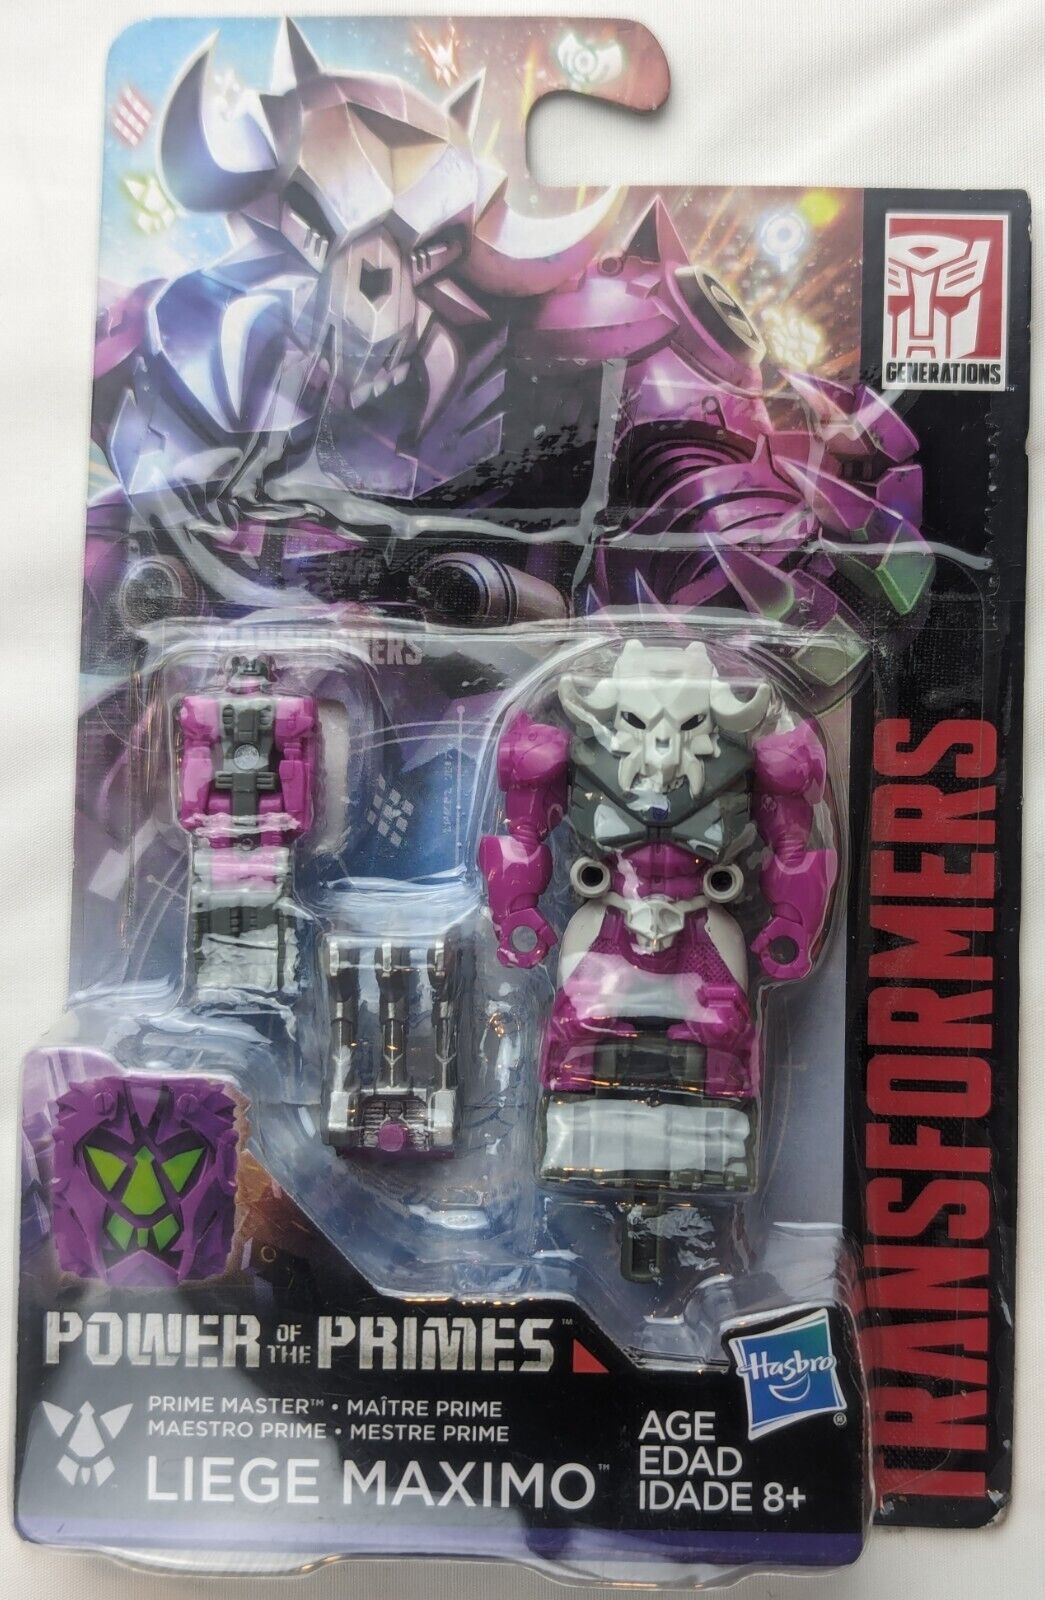 Liege Maximo Transformers Power of the Primes Skullgrin Decoy Prime Master New